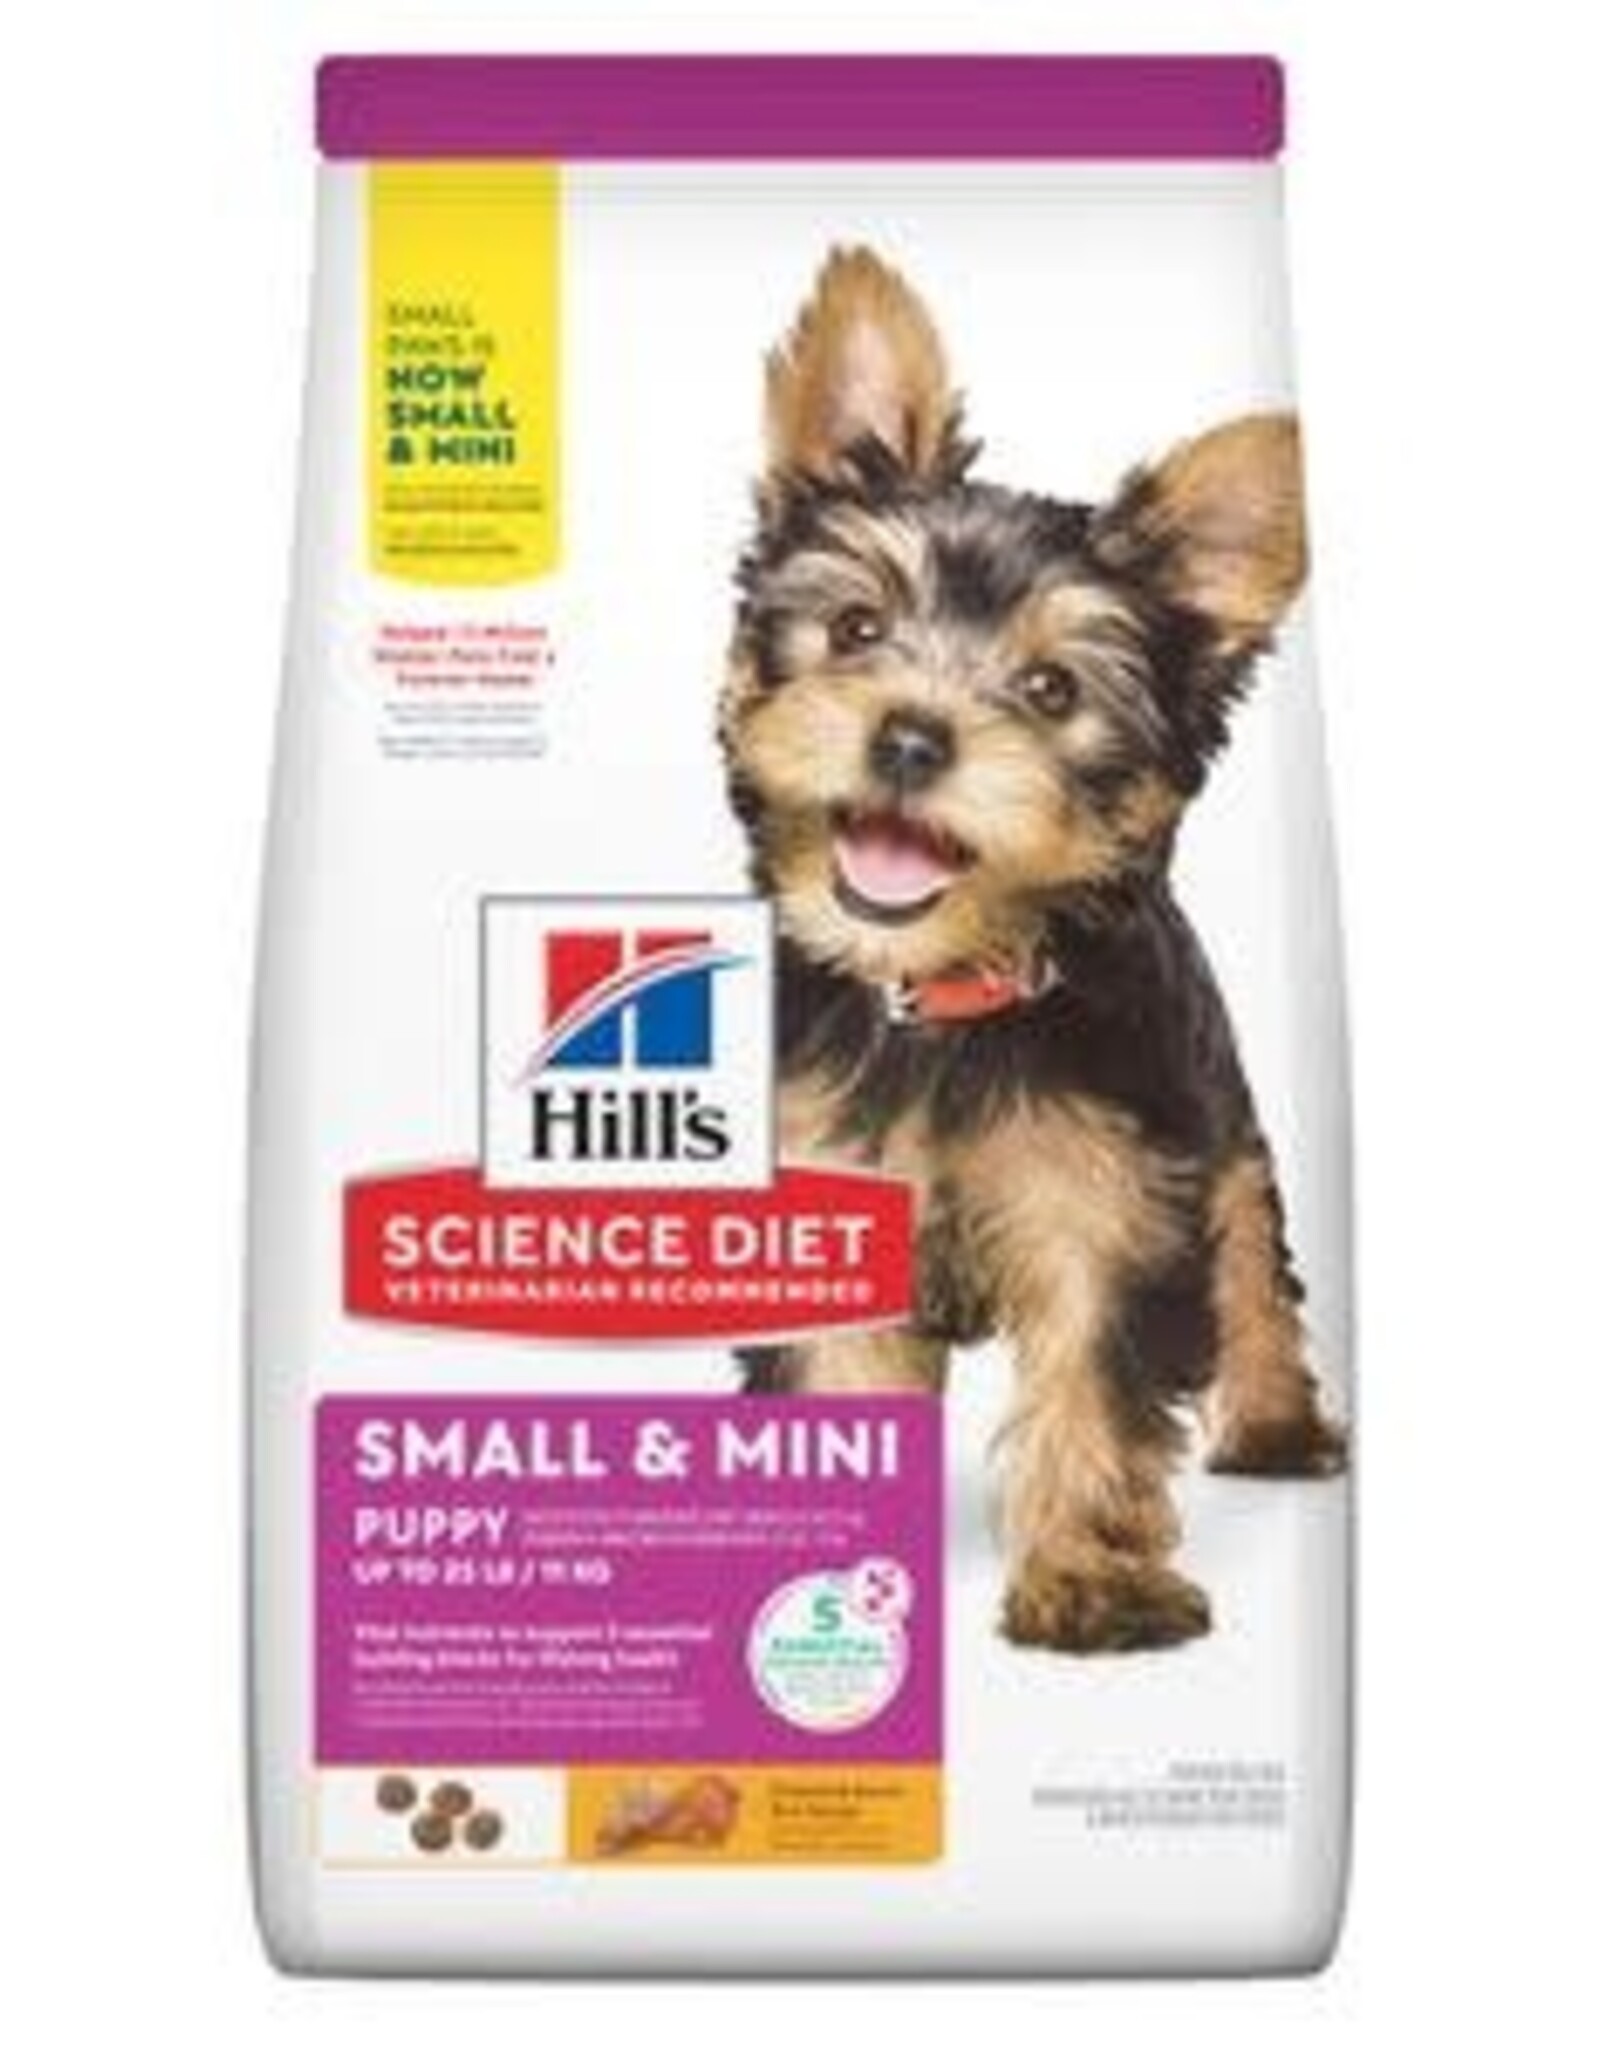 SCIENCE DIET HILL'S SCIENCE DIET CANINE PUPPY SMALL PAWS 15.5LBS